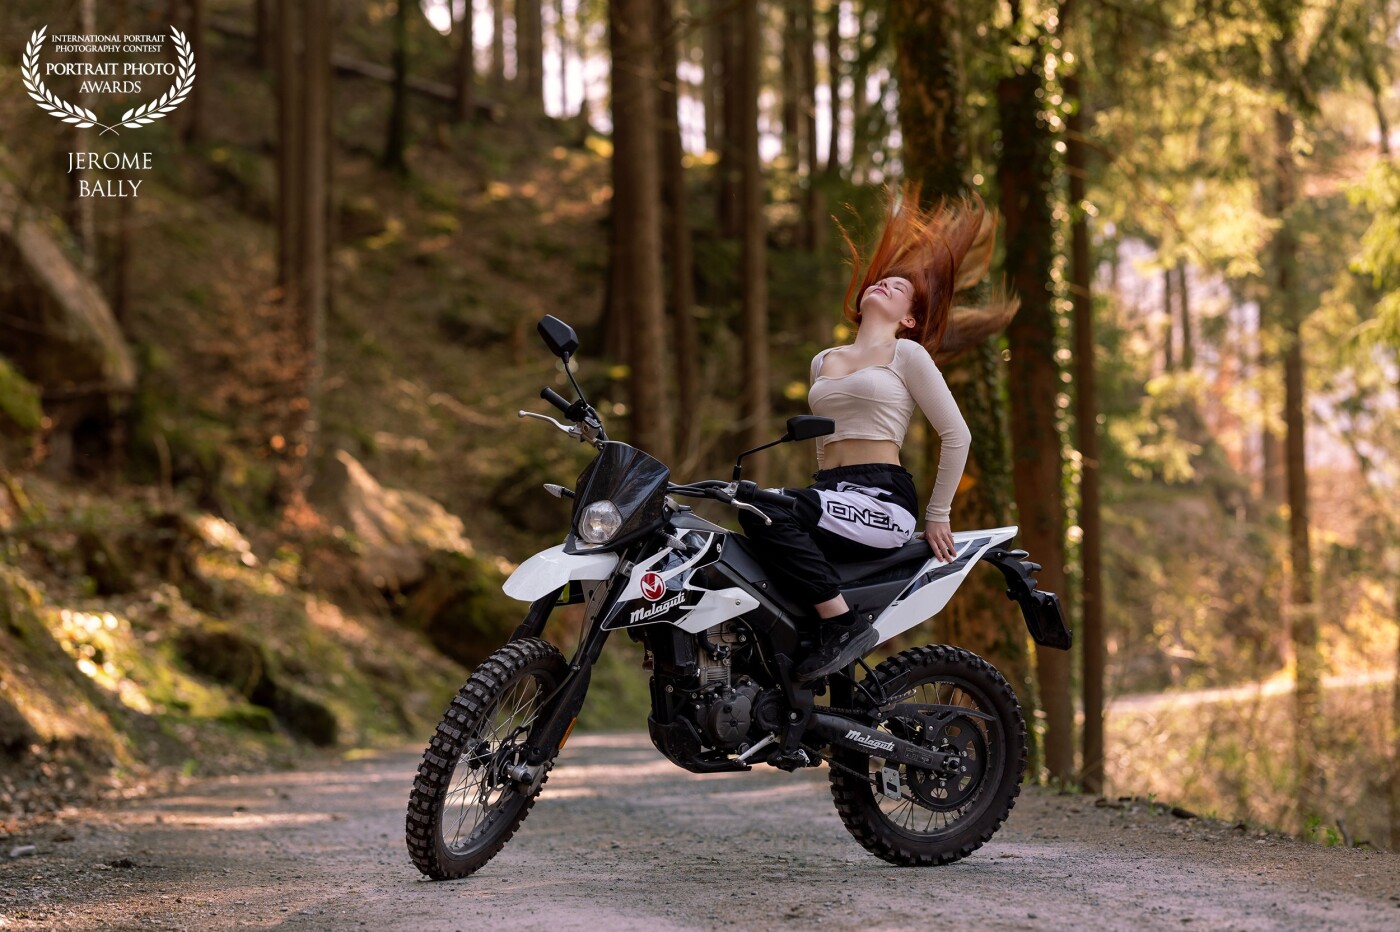 This picture was taken in the late afternoon together with Kate (@kate.xxenia) on her friends motorbike. We were trying some new poses when I aked her to play with her hairs and that is the result